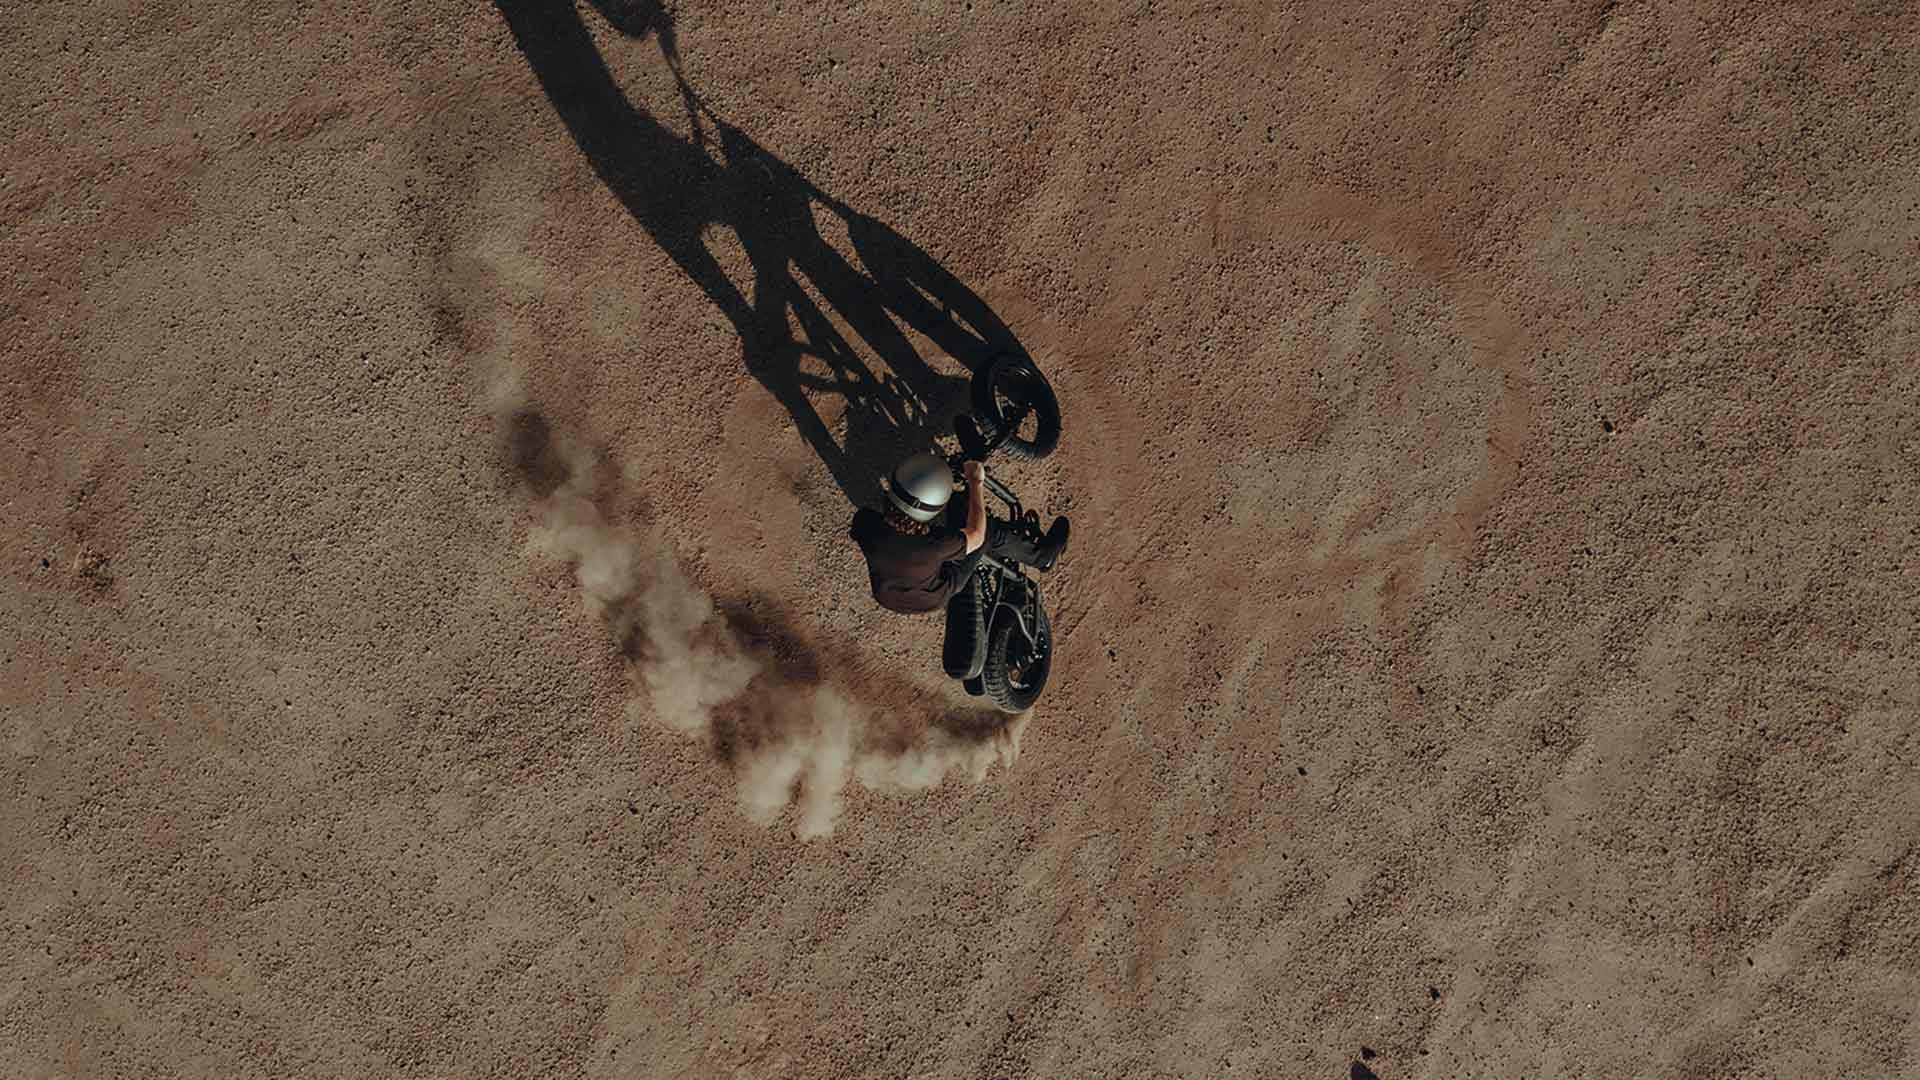 Rider on a Super73 ebike kicking up sand